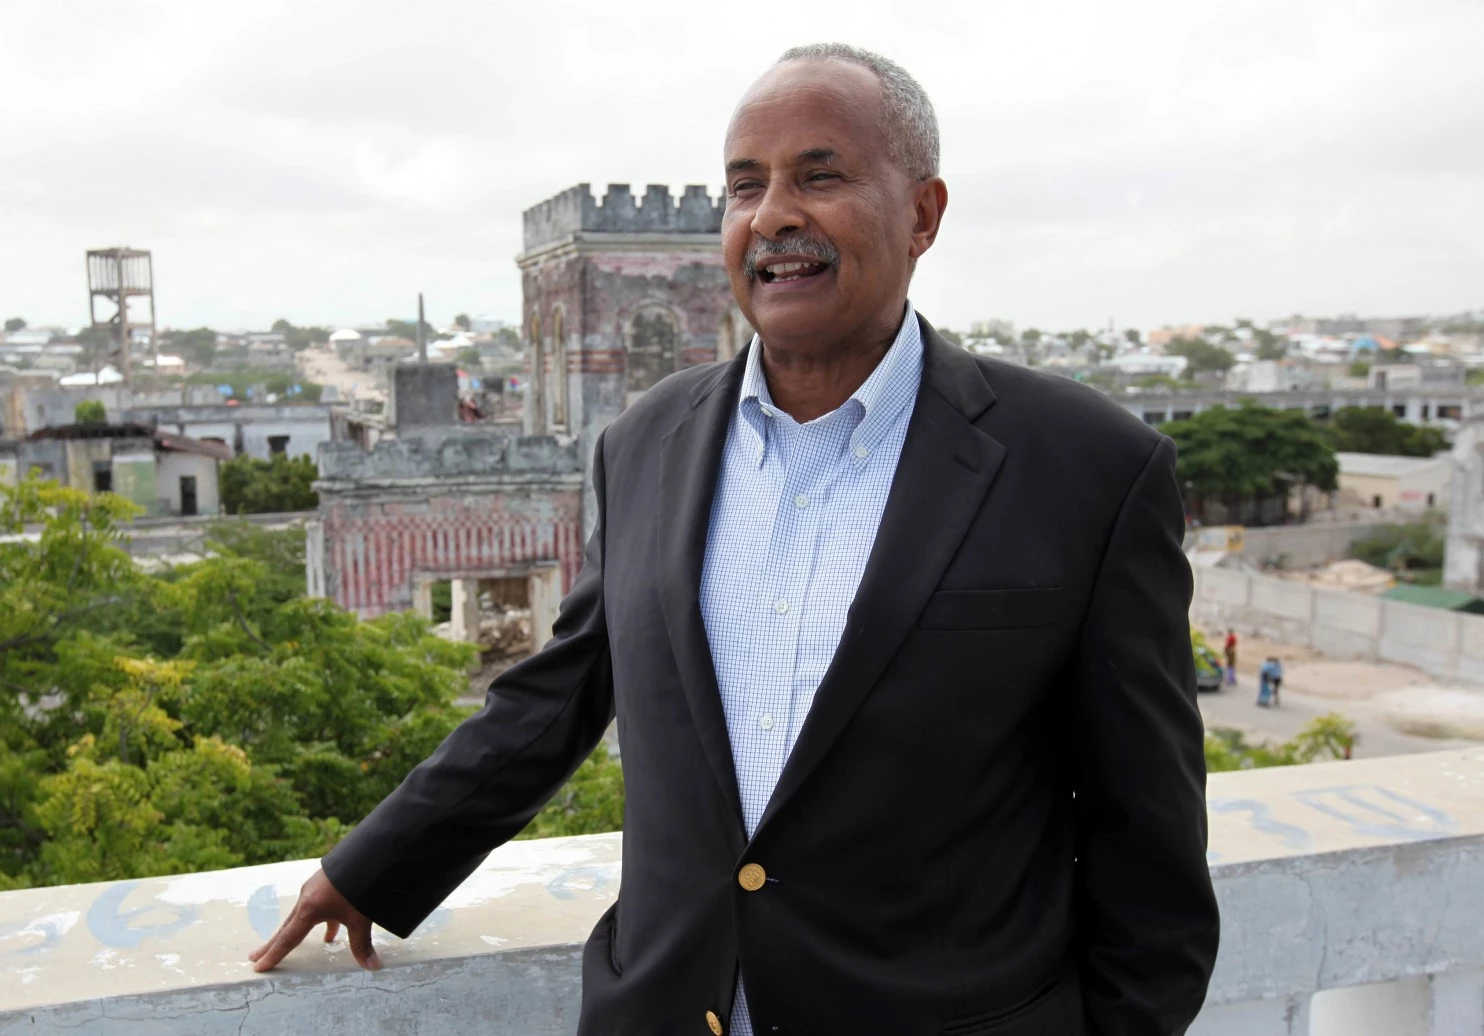 He once tried to fix failing D.C. schools. Now he’s trying to fix Somalia.